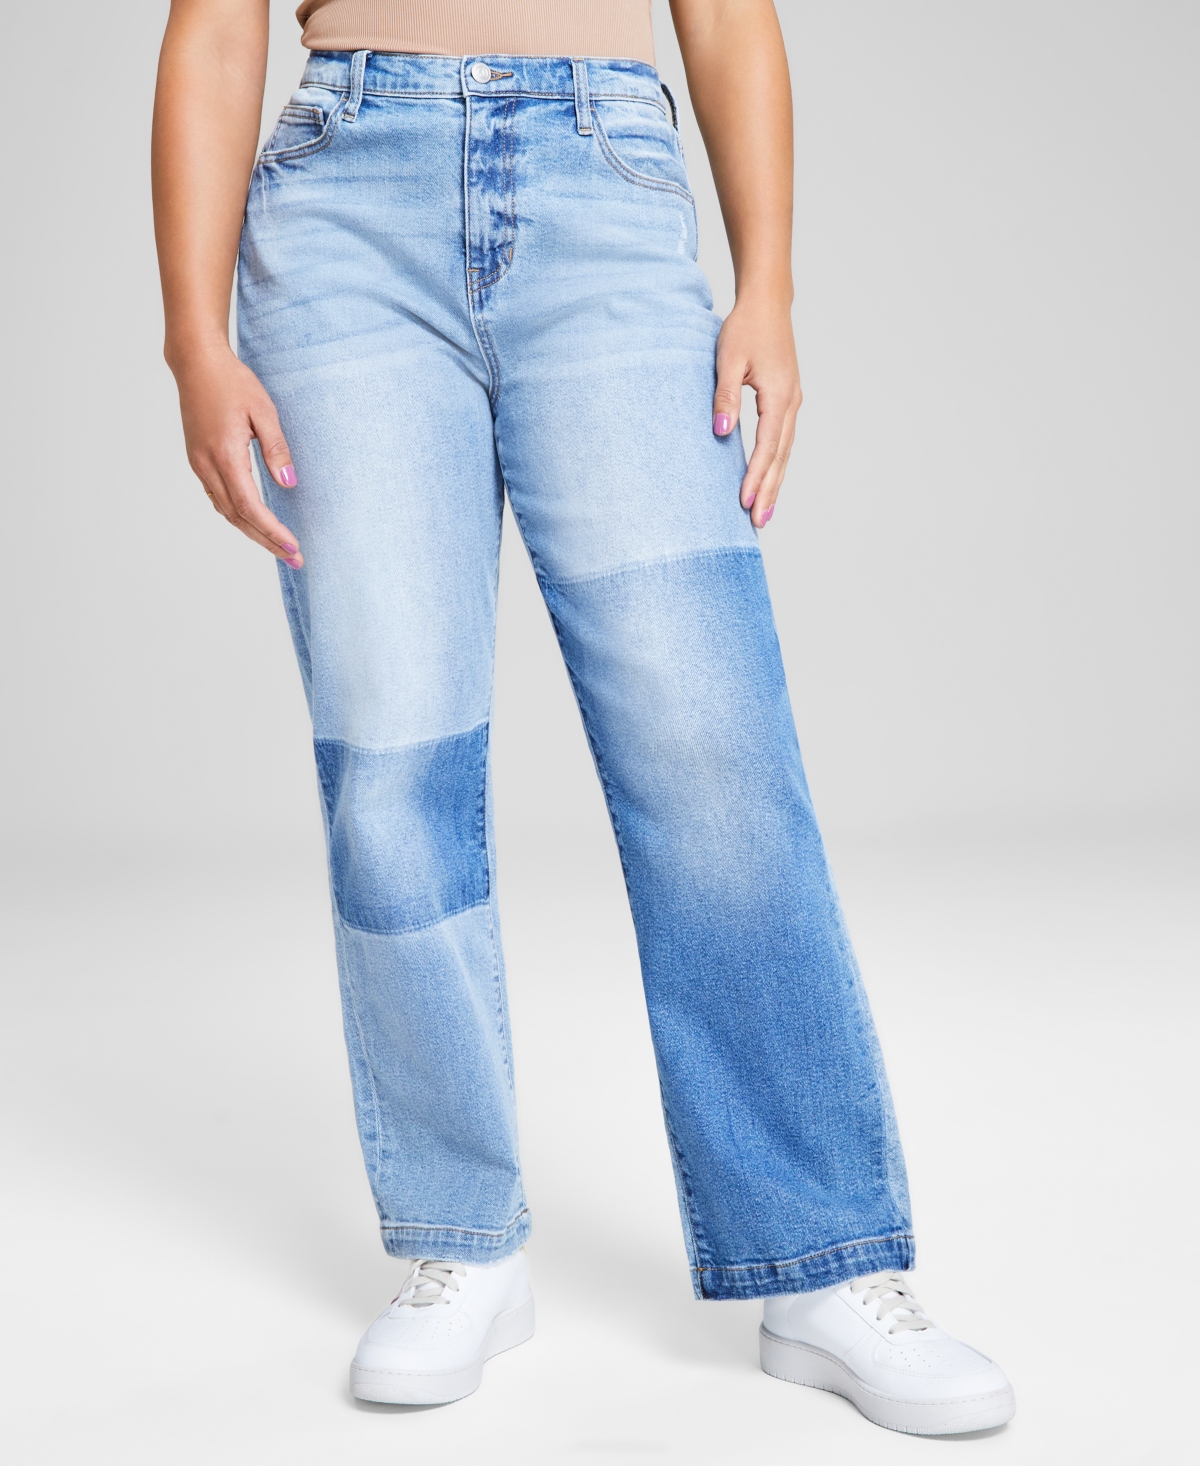 Women's Ultra-High-Rise Straight-Leg Jeans, Created for Macy's - Light Wash